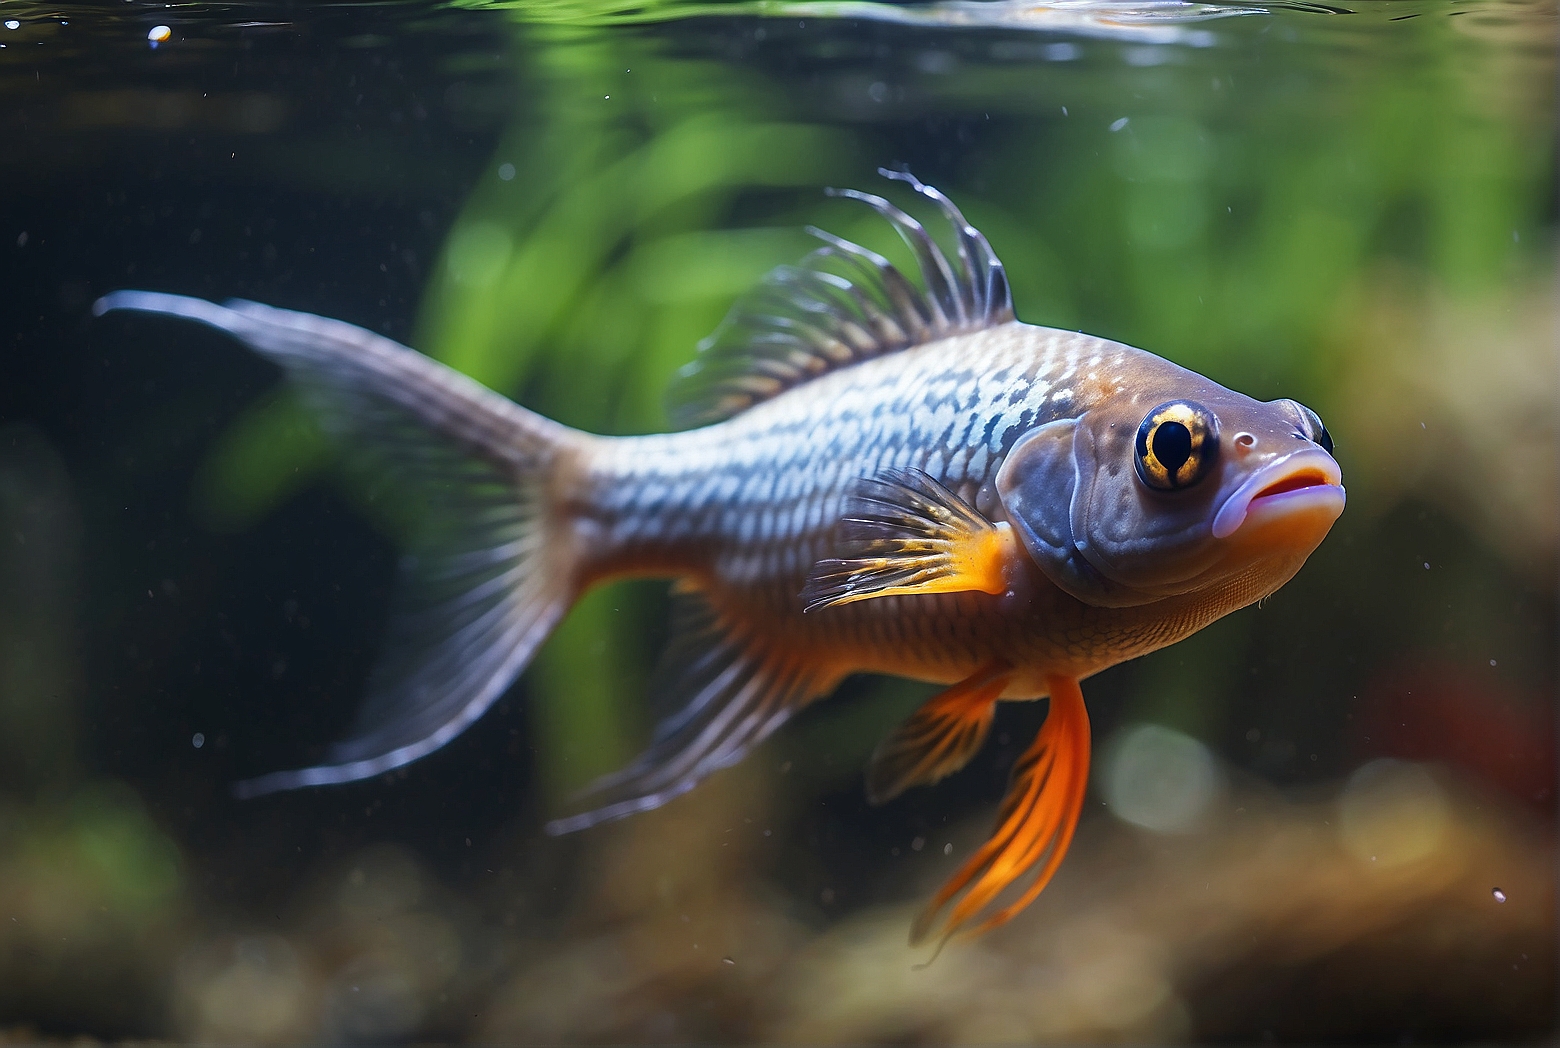 A Beginner’s Guide to Caring for Platies and Their Fry